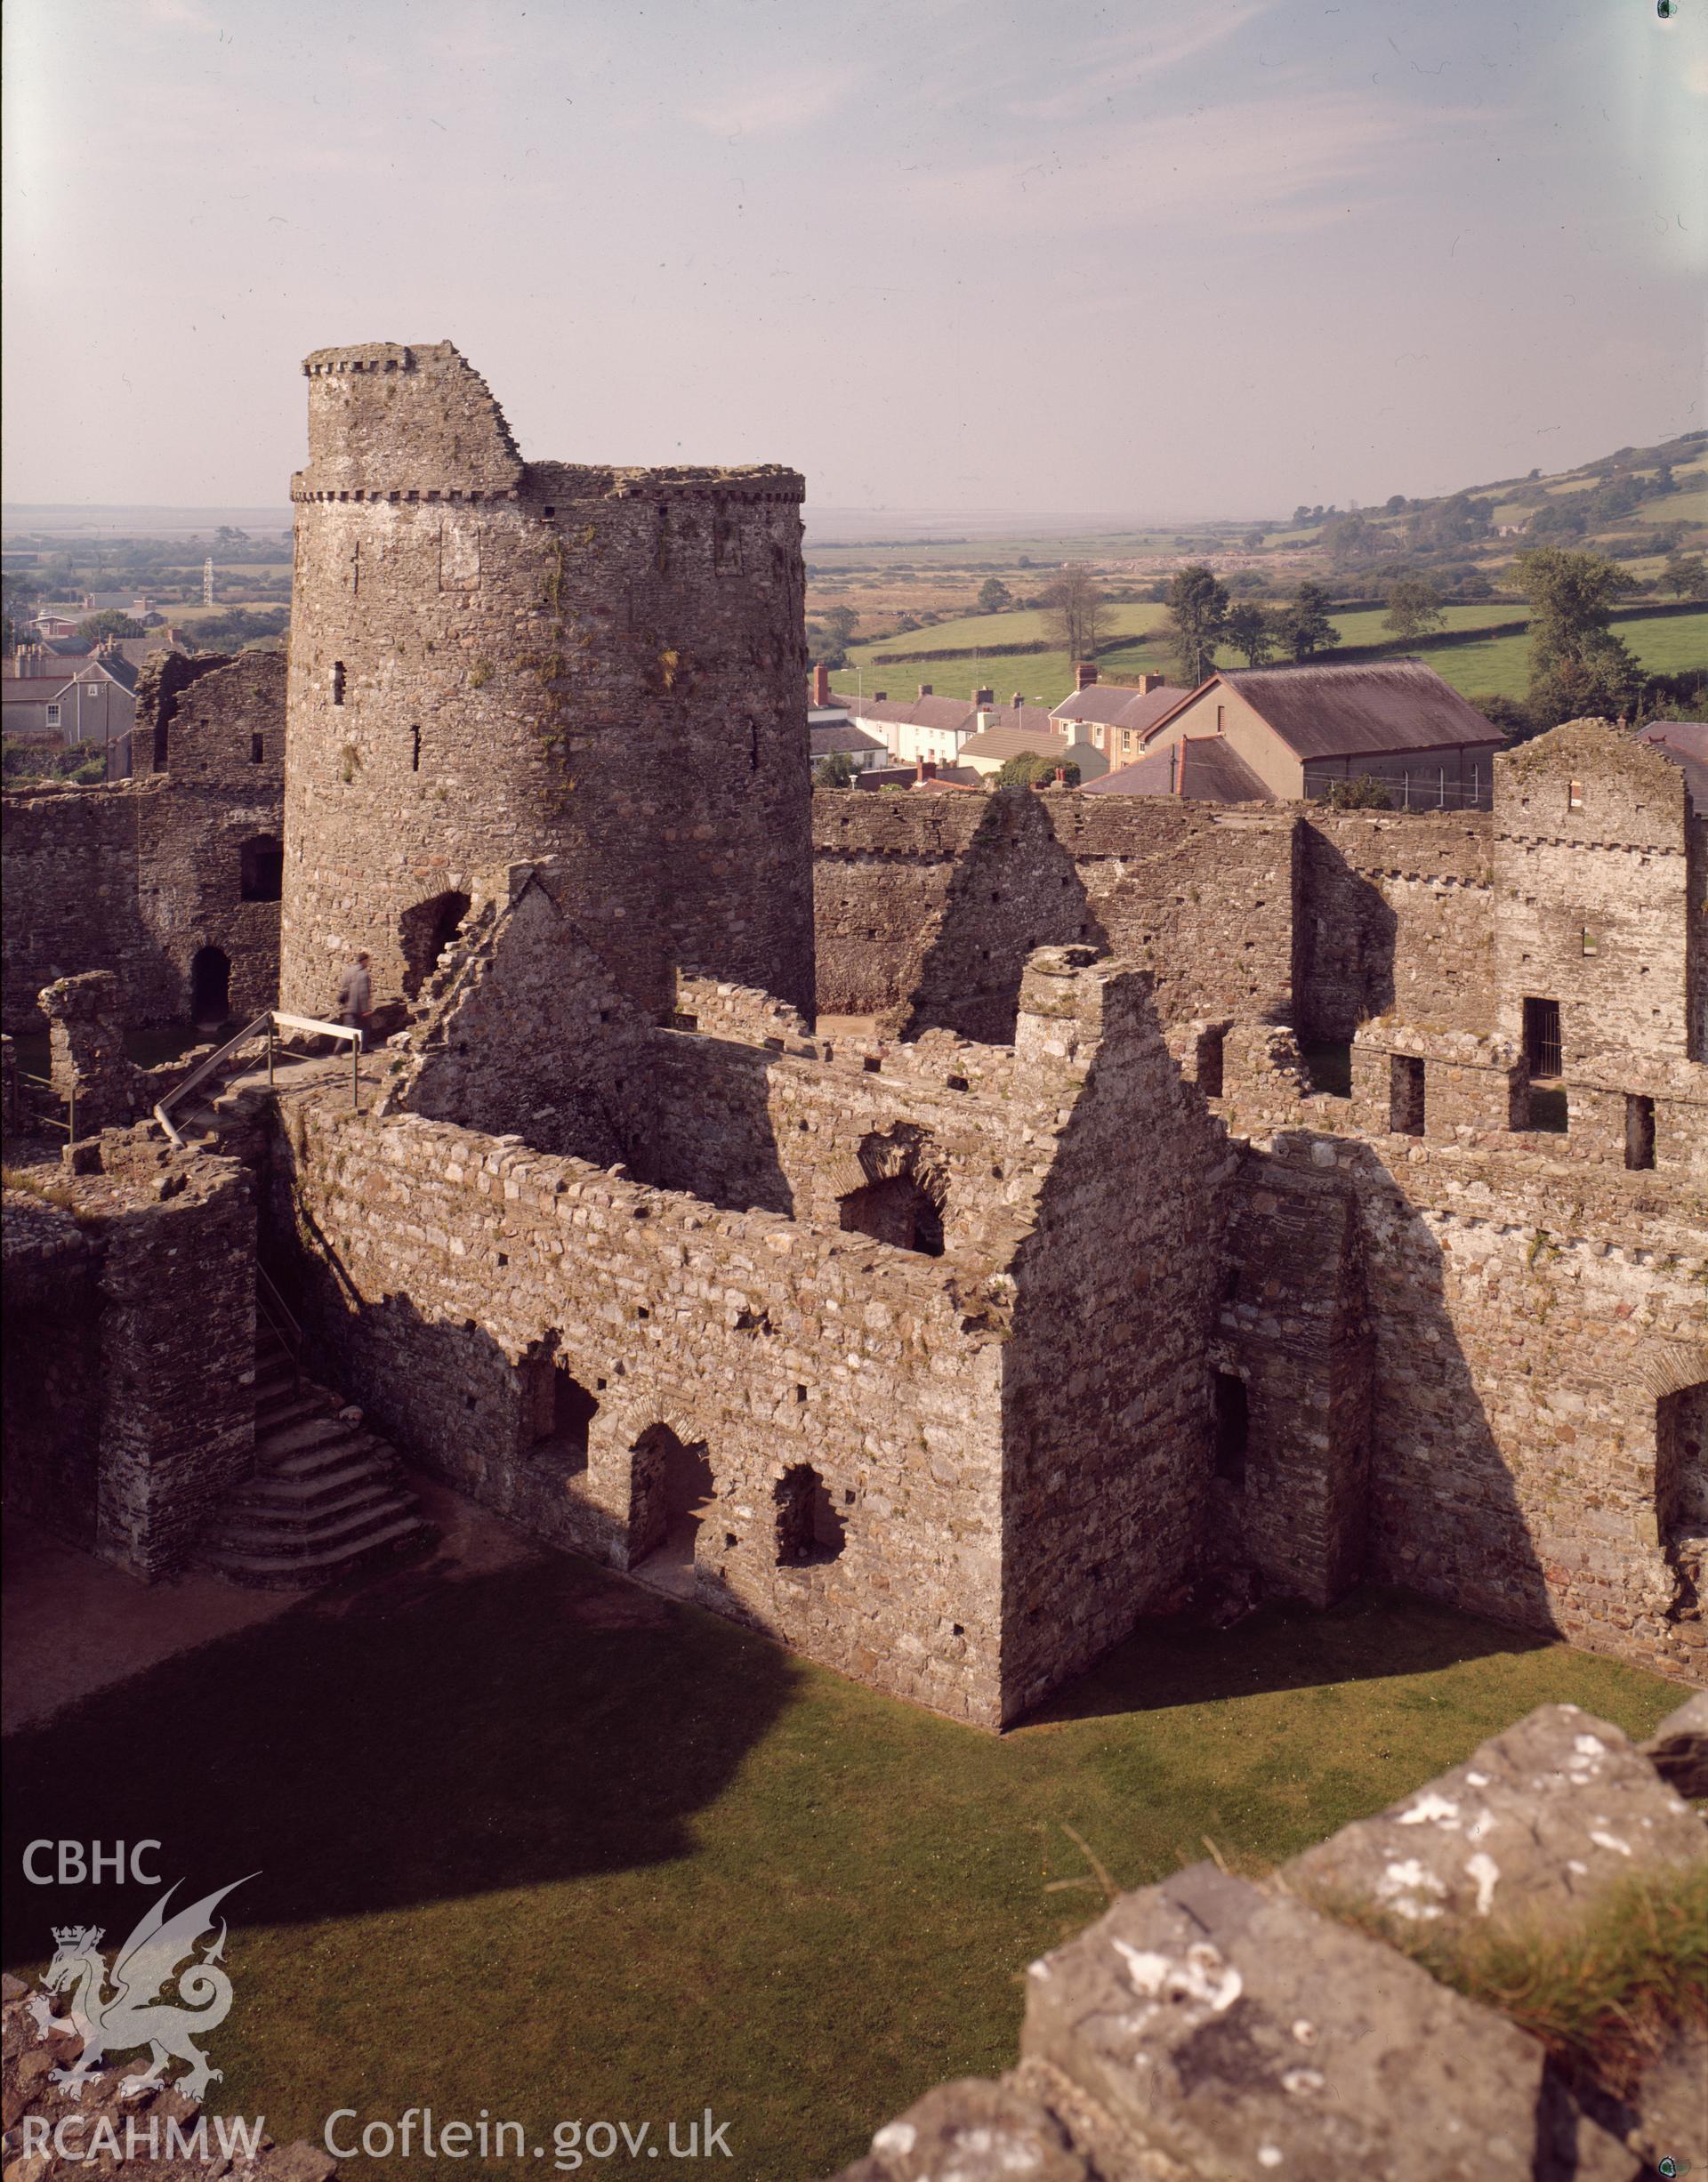 Colour view of Kidwelly Castle.